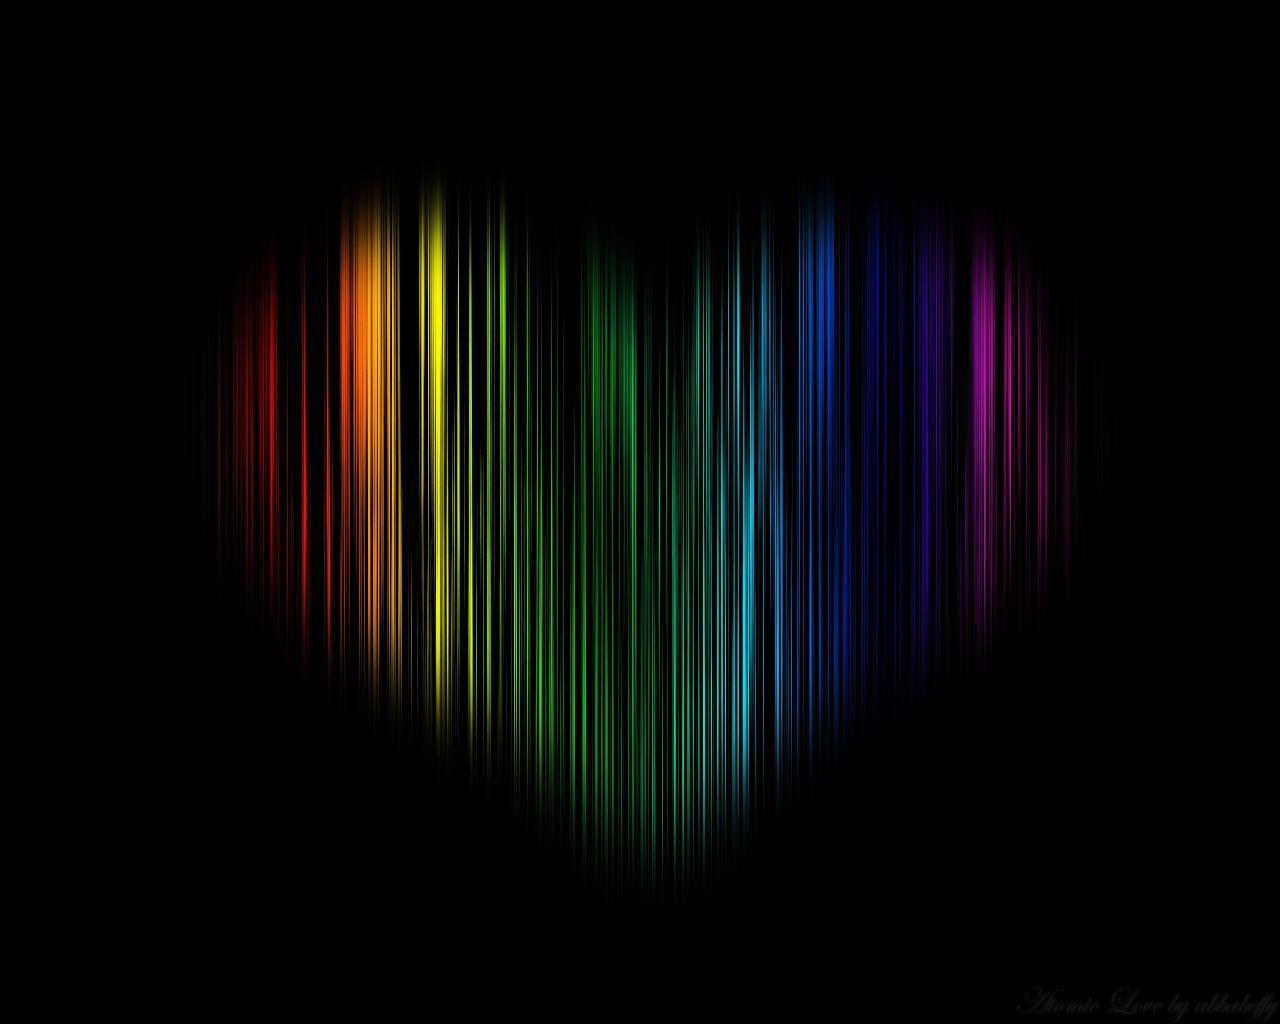 Awesome Colorful Love Image in Black Background Picture Wallpaper